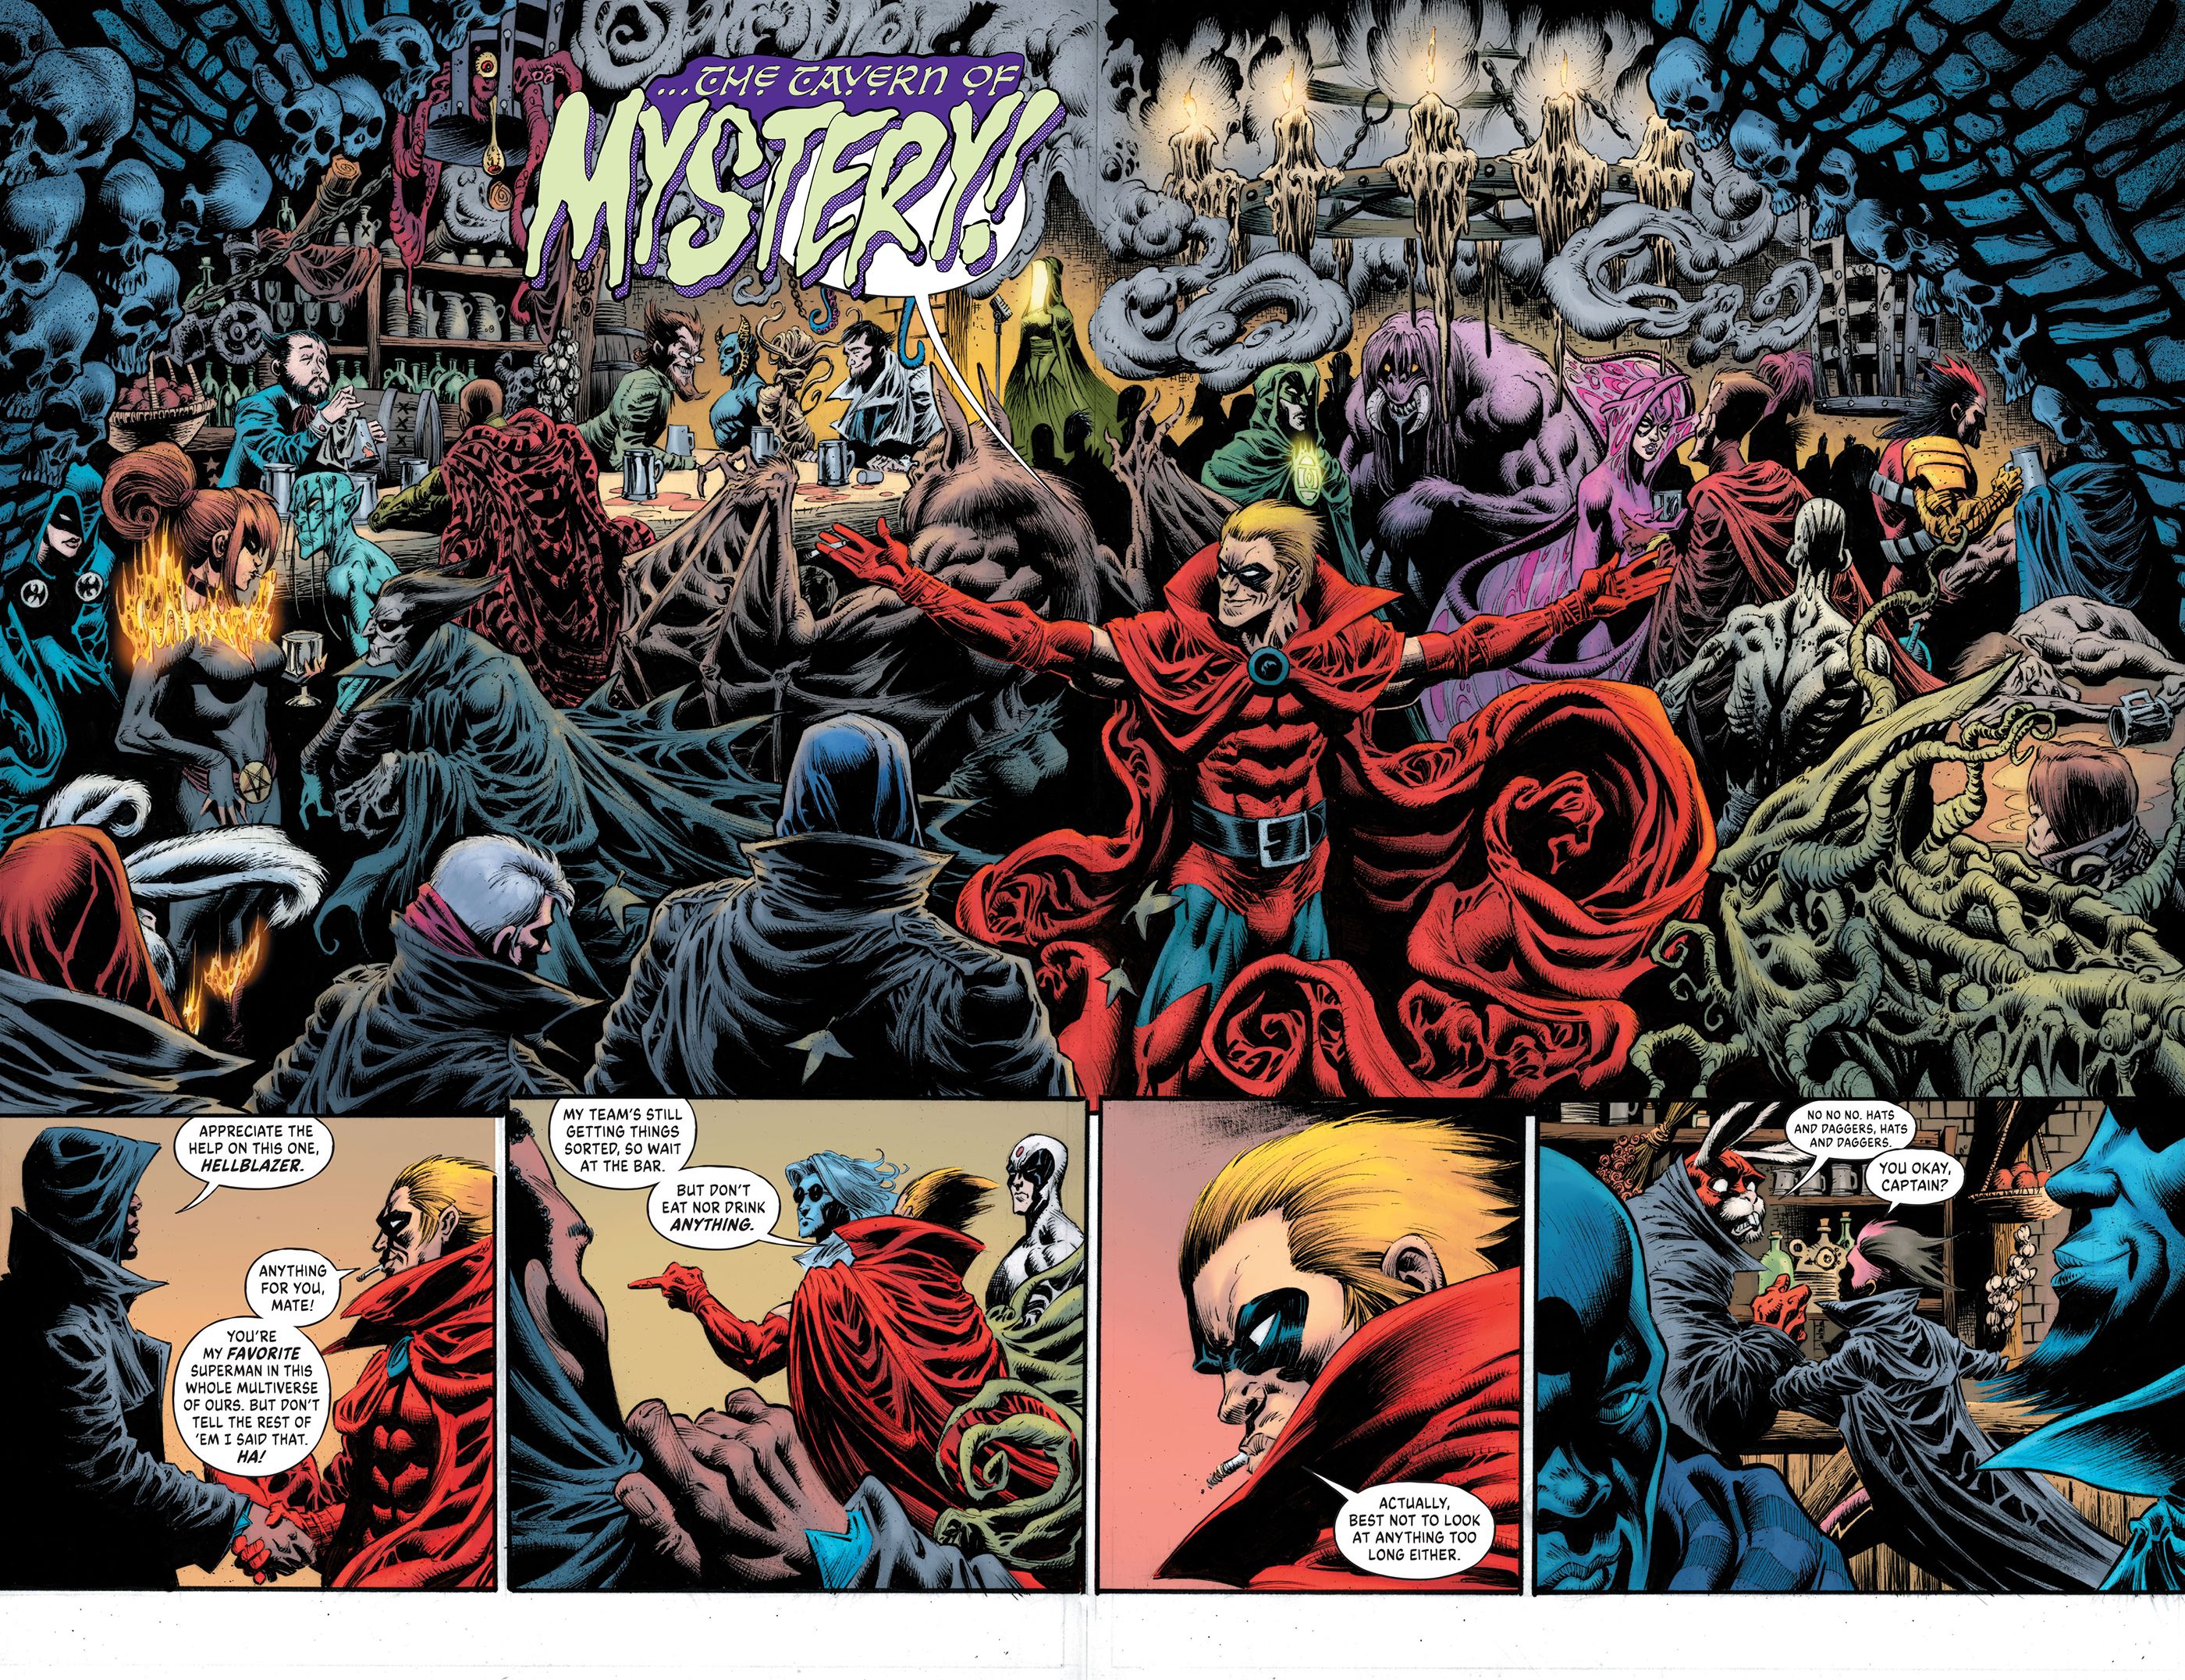 Hellblazer welcomes Justice Incarnate into the Tavern of Mystery.